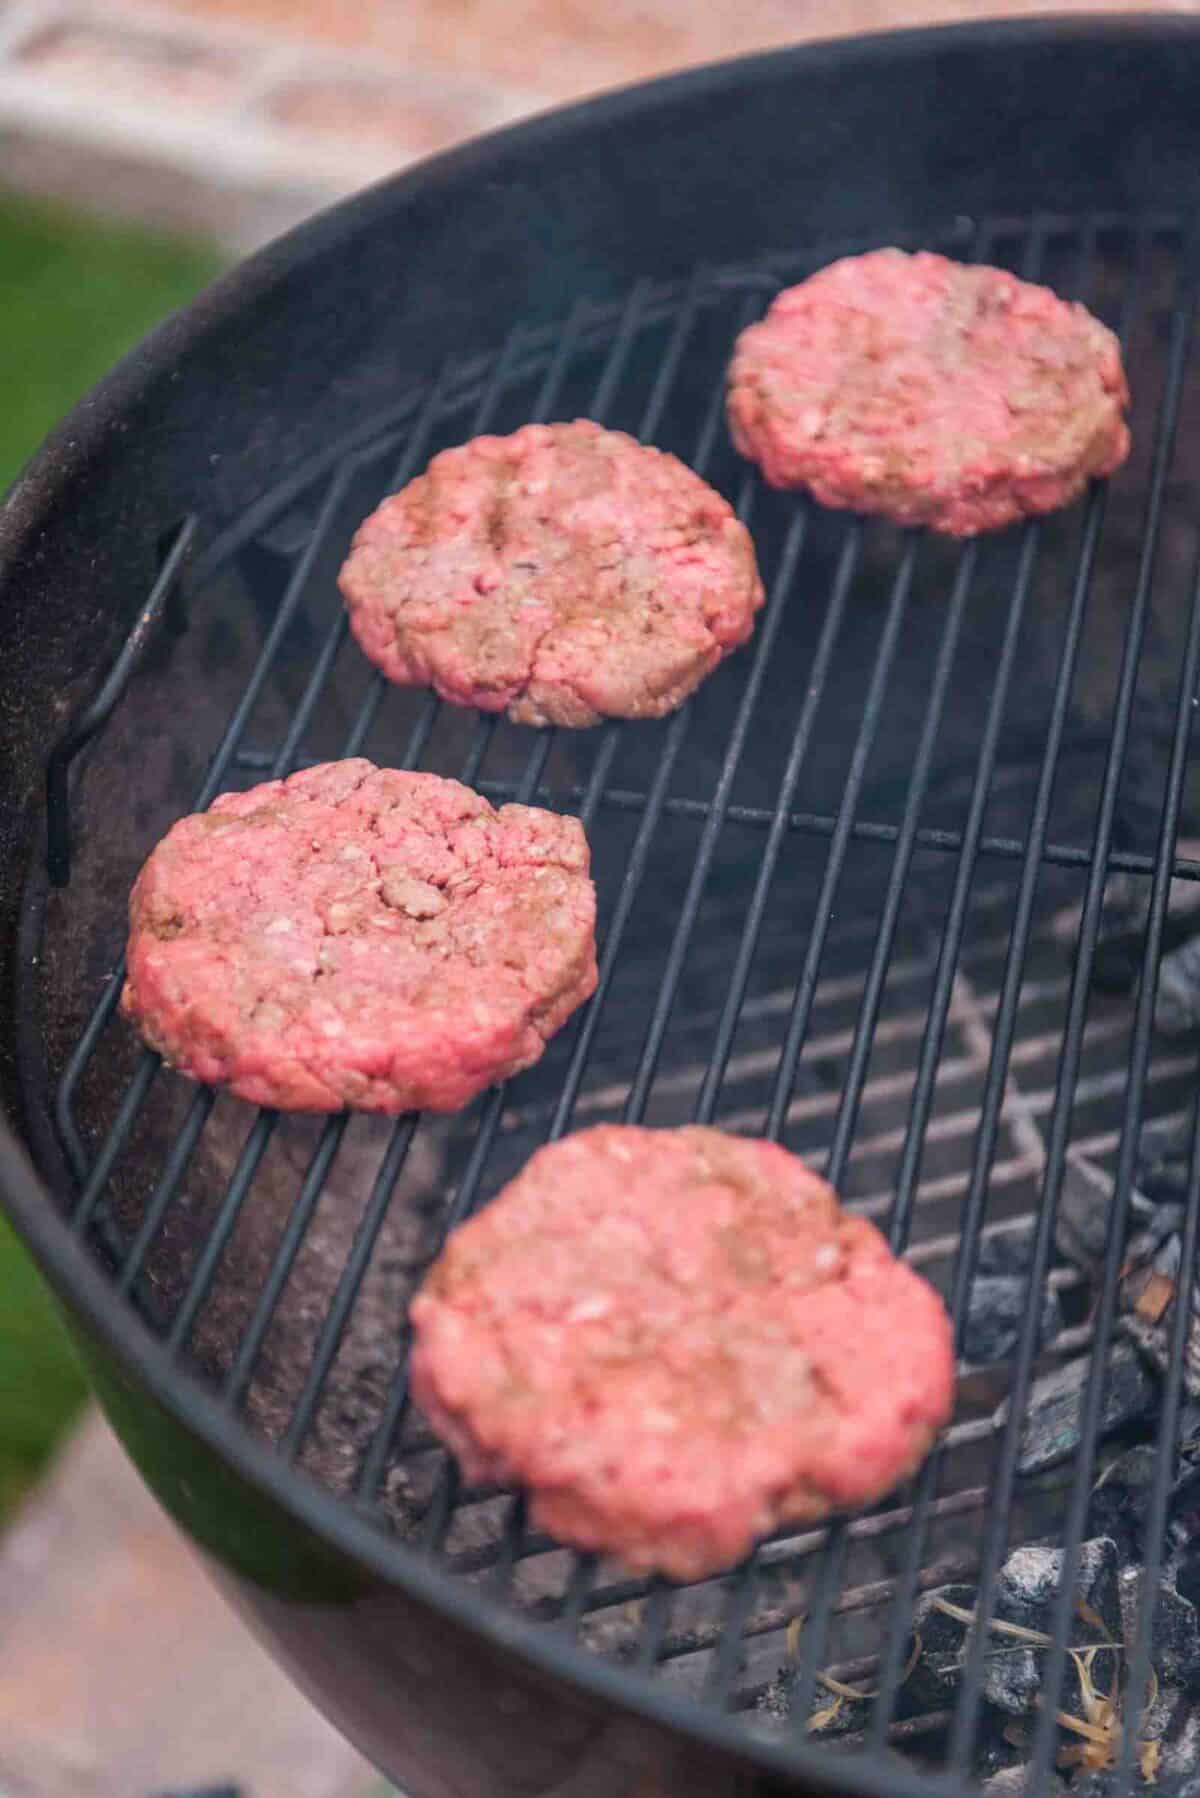 Raw patties on the grill grates. 